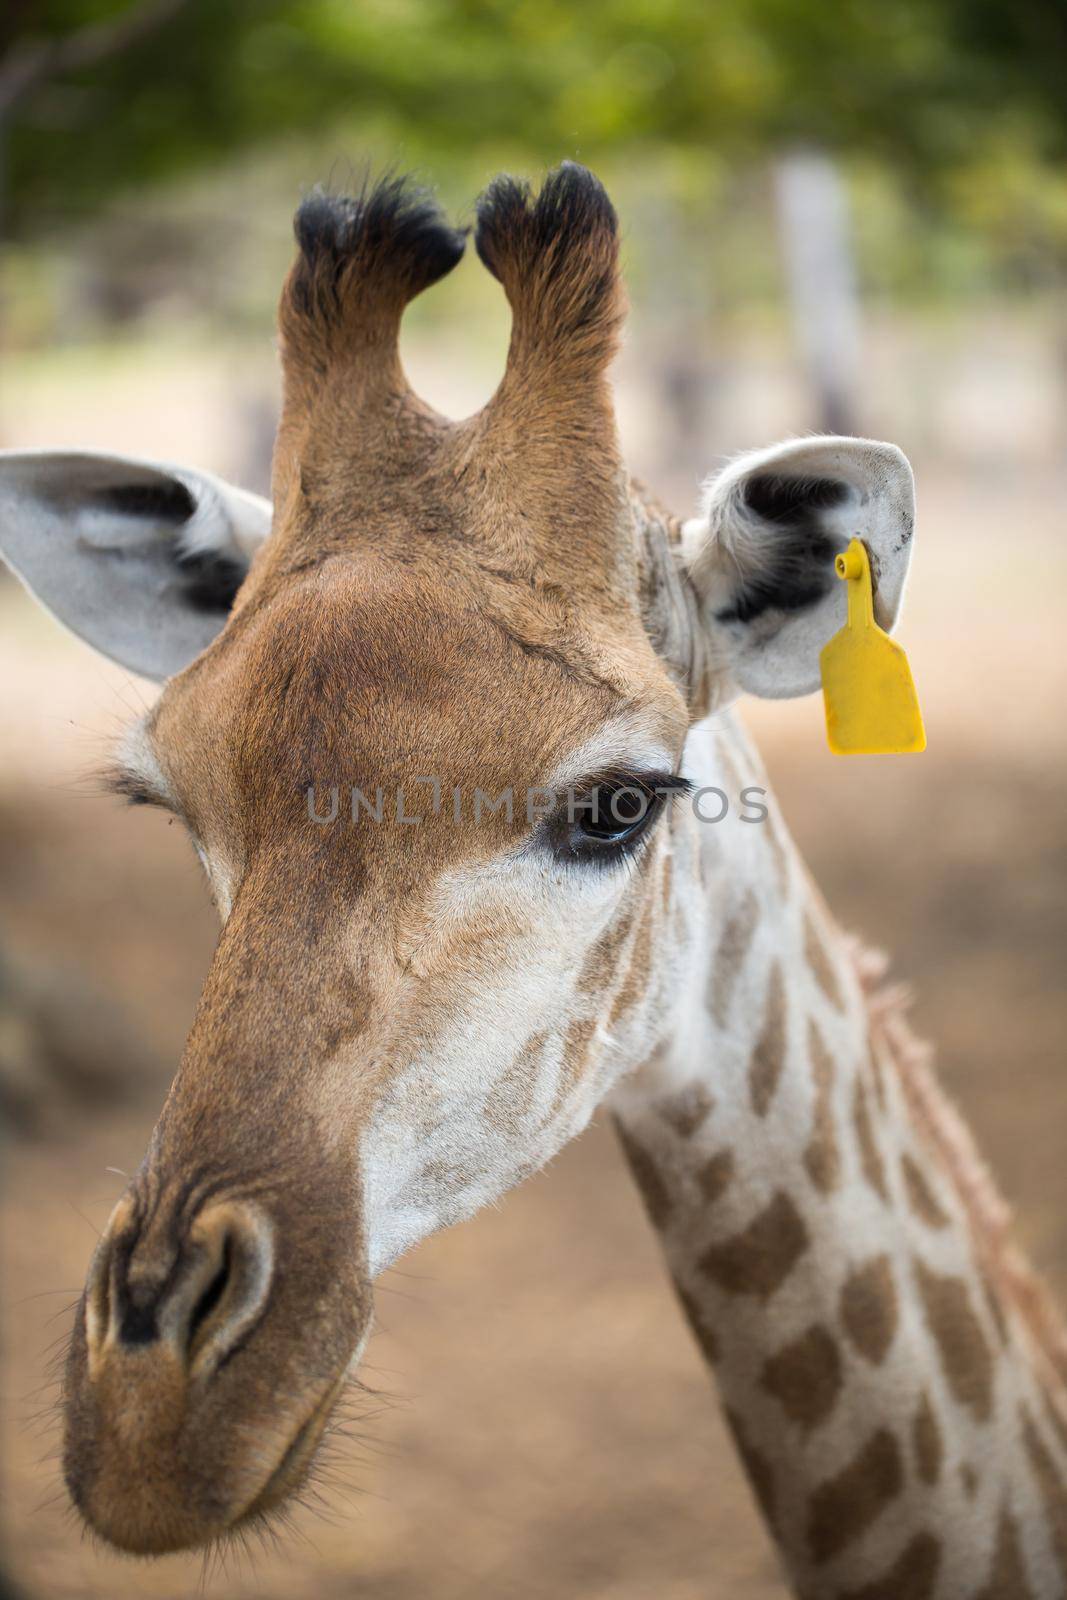 Reticulated giraffe close-up at the zoo. Mauritius by StudioPeace